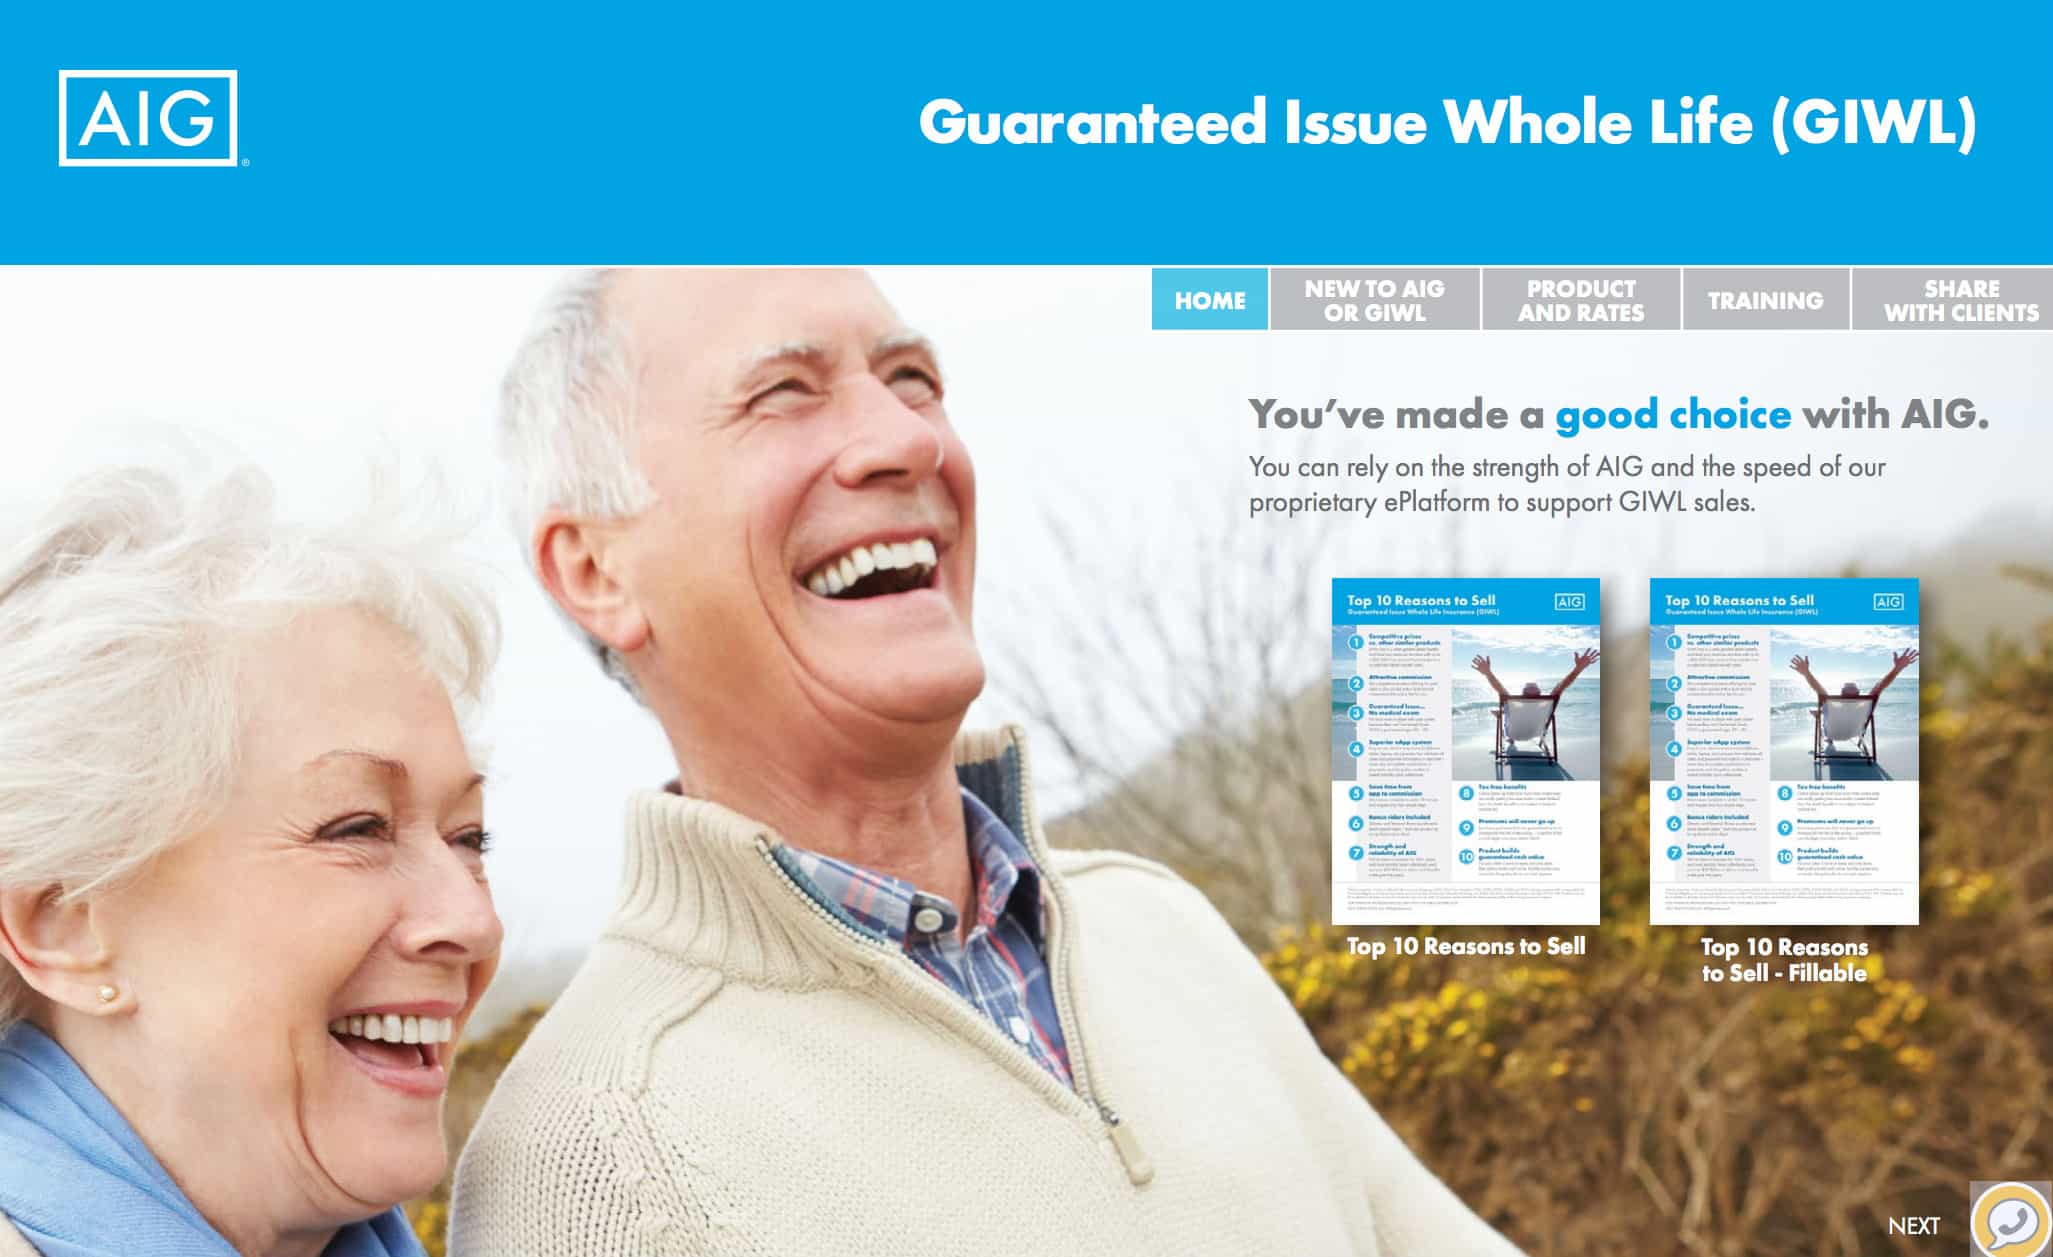 American General Guaranteed Issue Whole Life Insurance